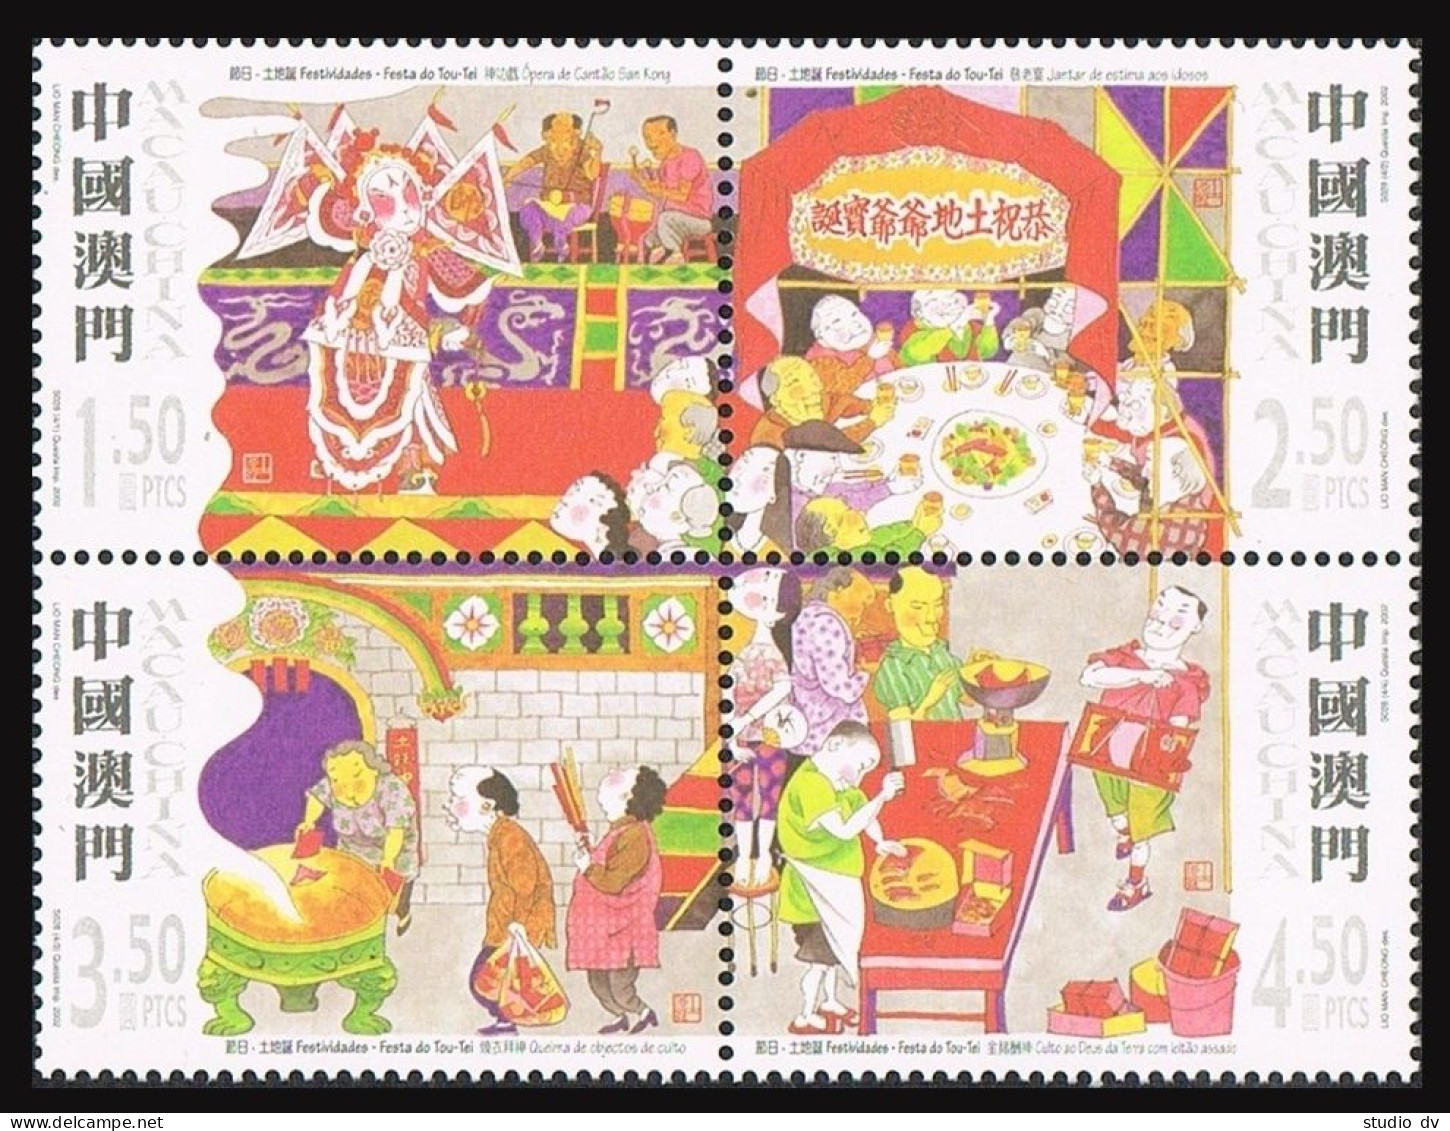 Macao 1086 Af Block,MNH. Tou-tei Festival, 2002.Opera,Dinner,Religious Objects, - Unused Stamps